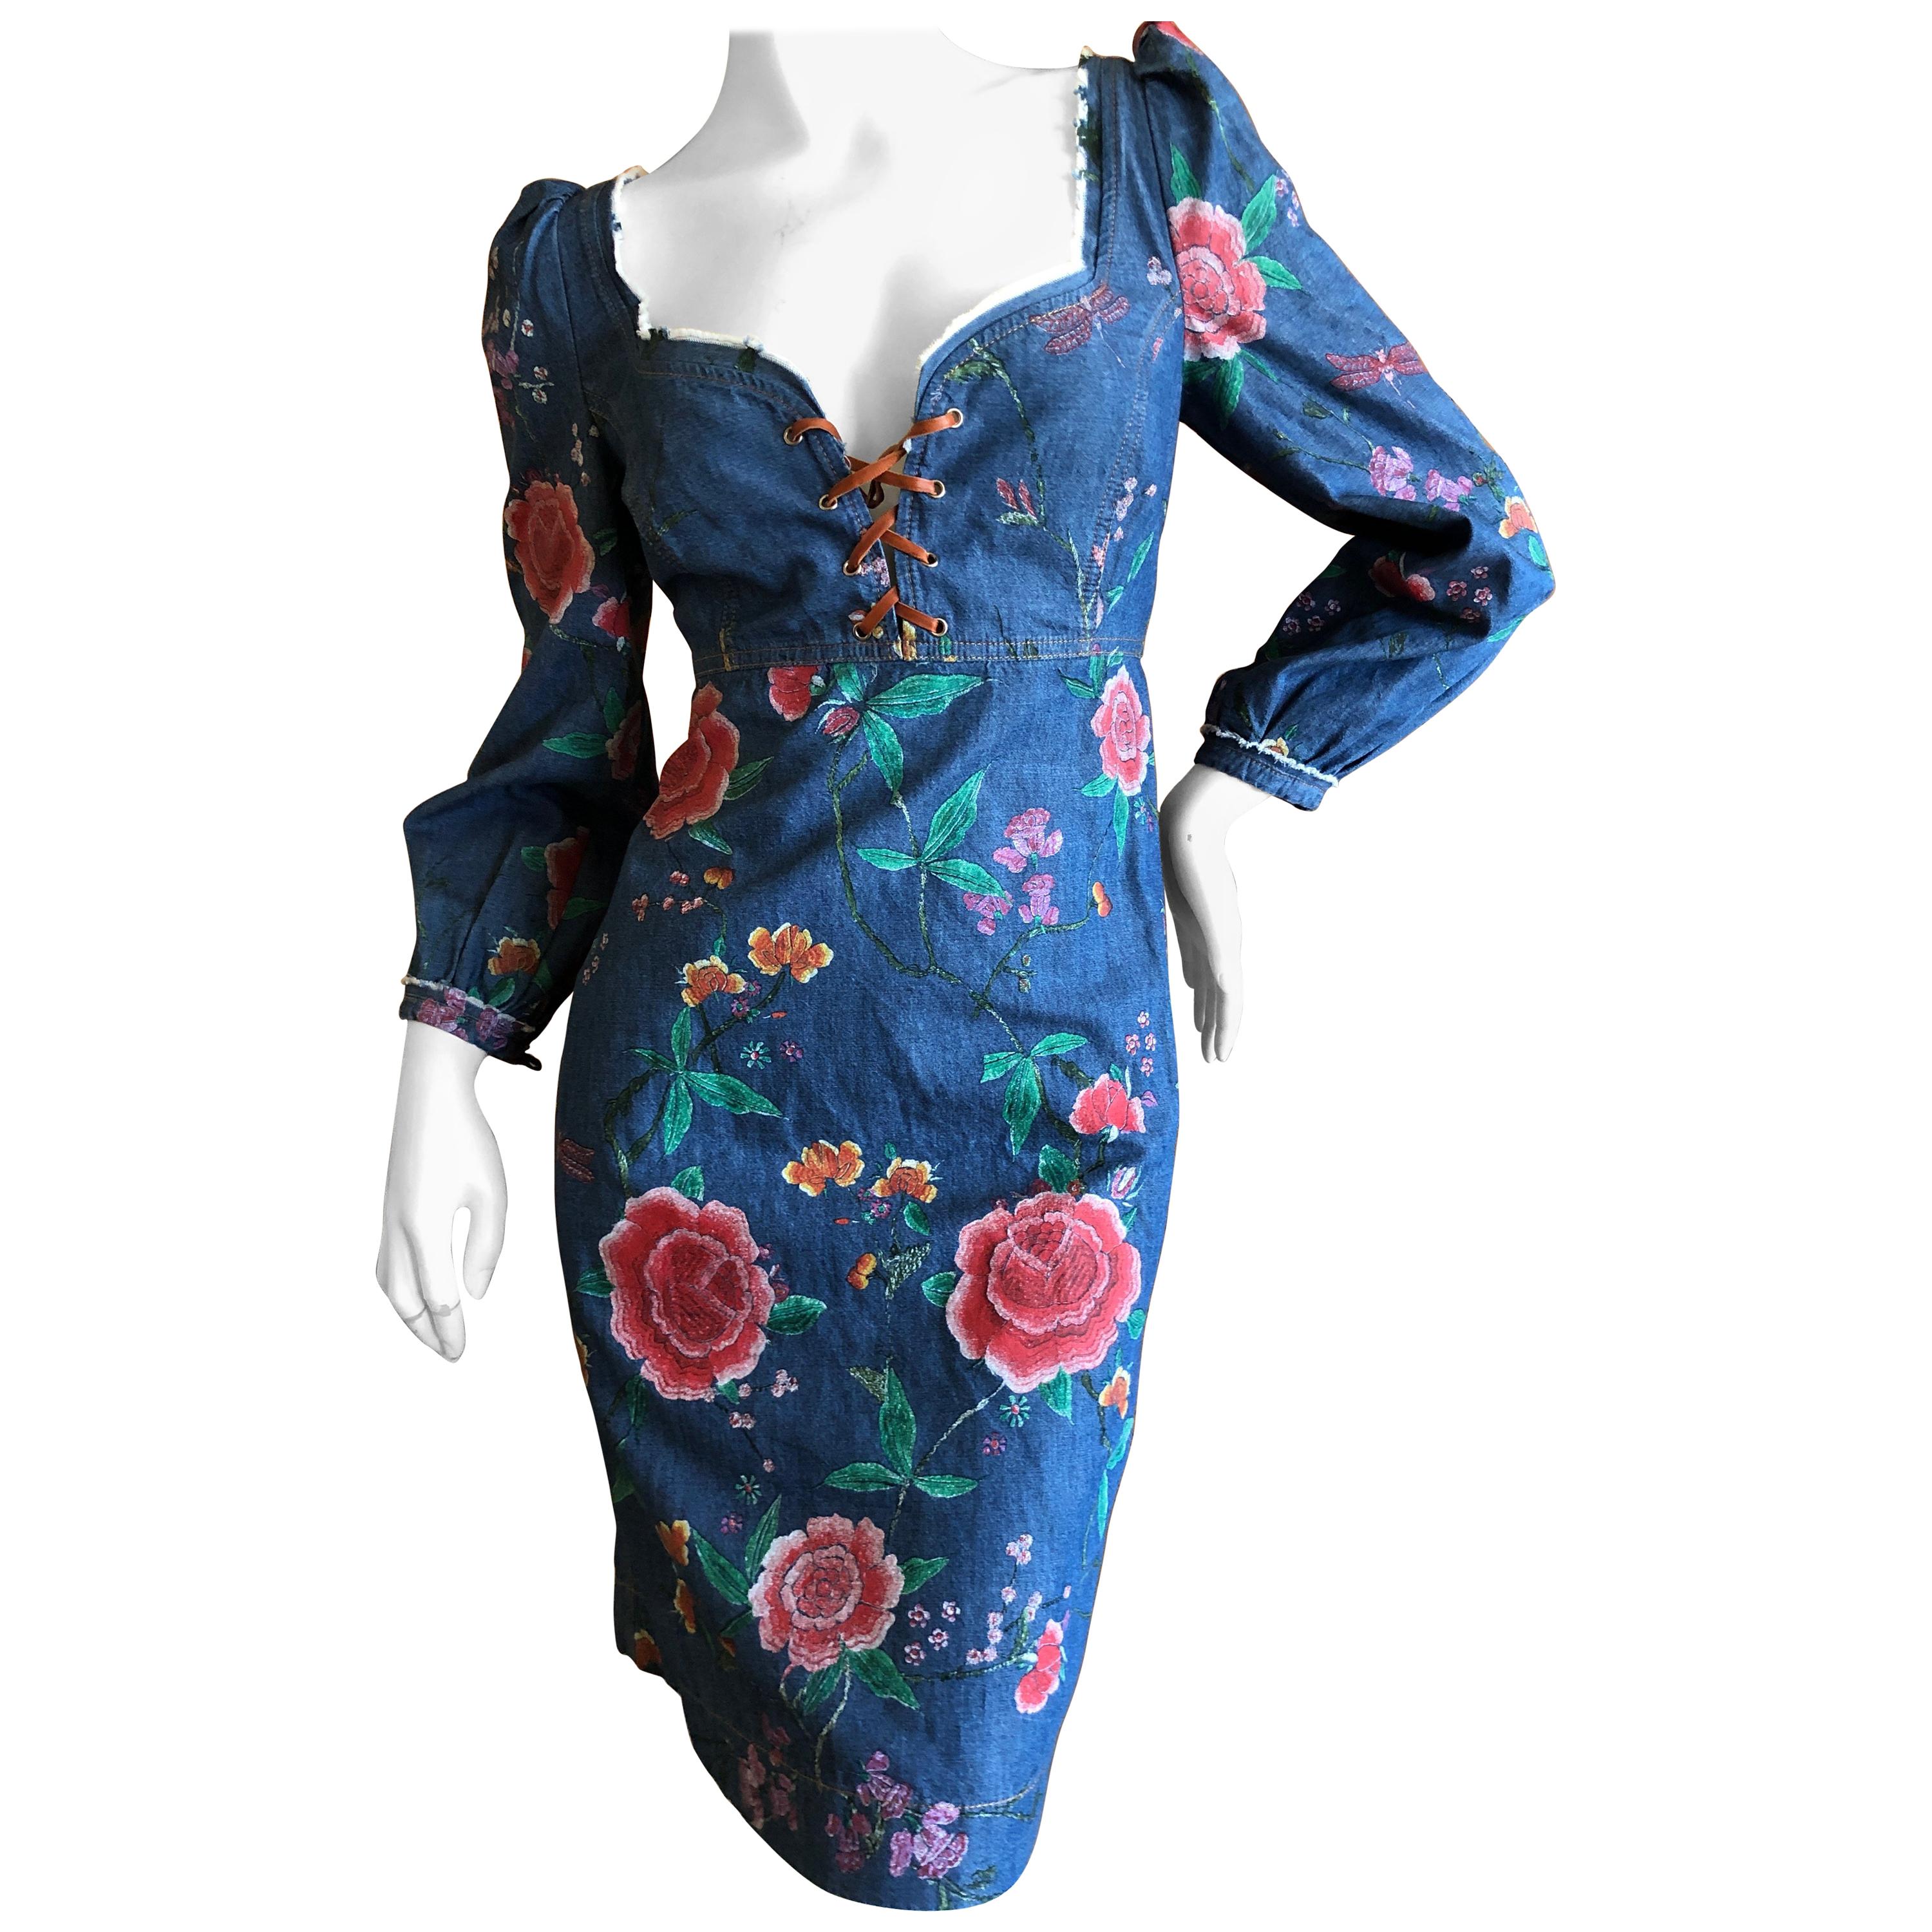 Roberto Cavalli Folkloric Rose Print Denim Cocktail Dress with Lace Up Details For Sale